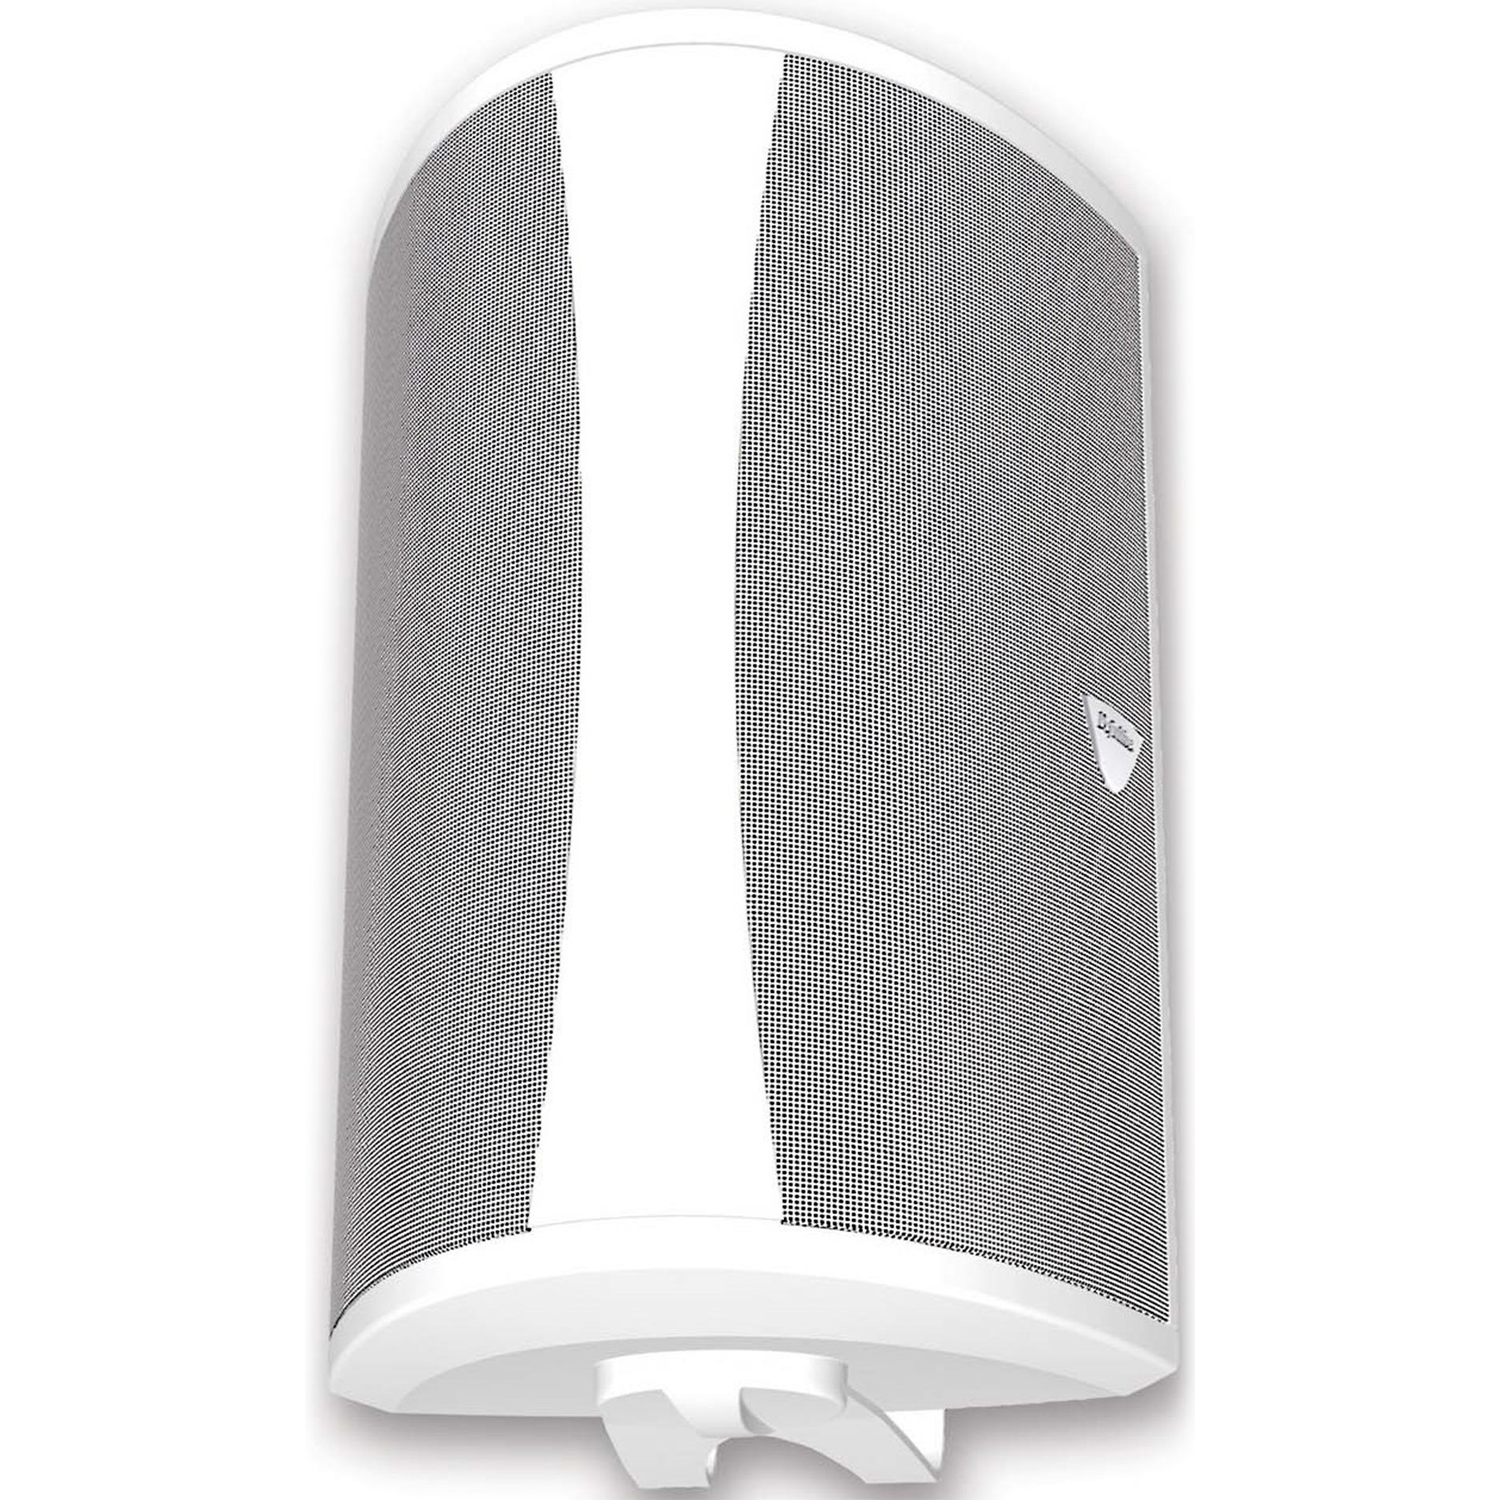 DEFINITIVE TECHNOLOGY AW6500 EACH 6.5" 2-Way Outdoor Speaker White